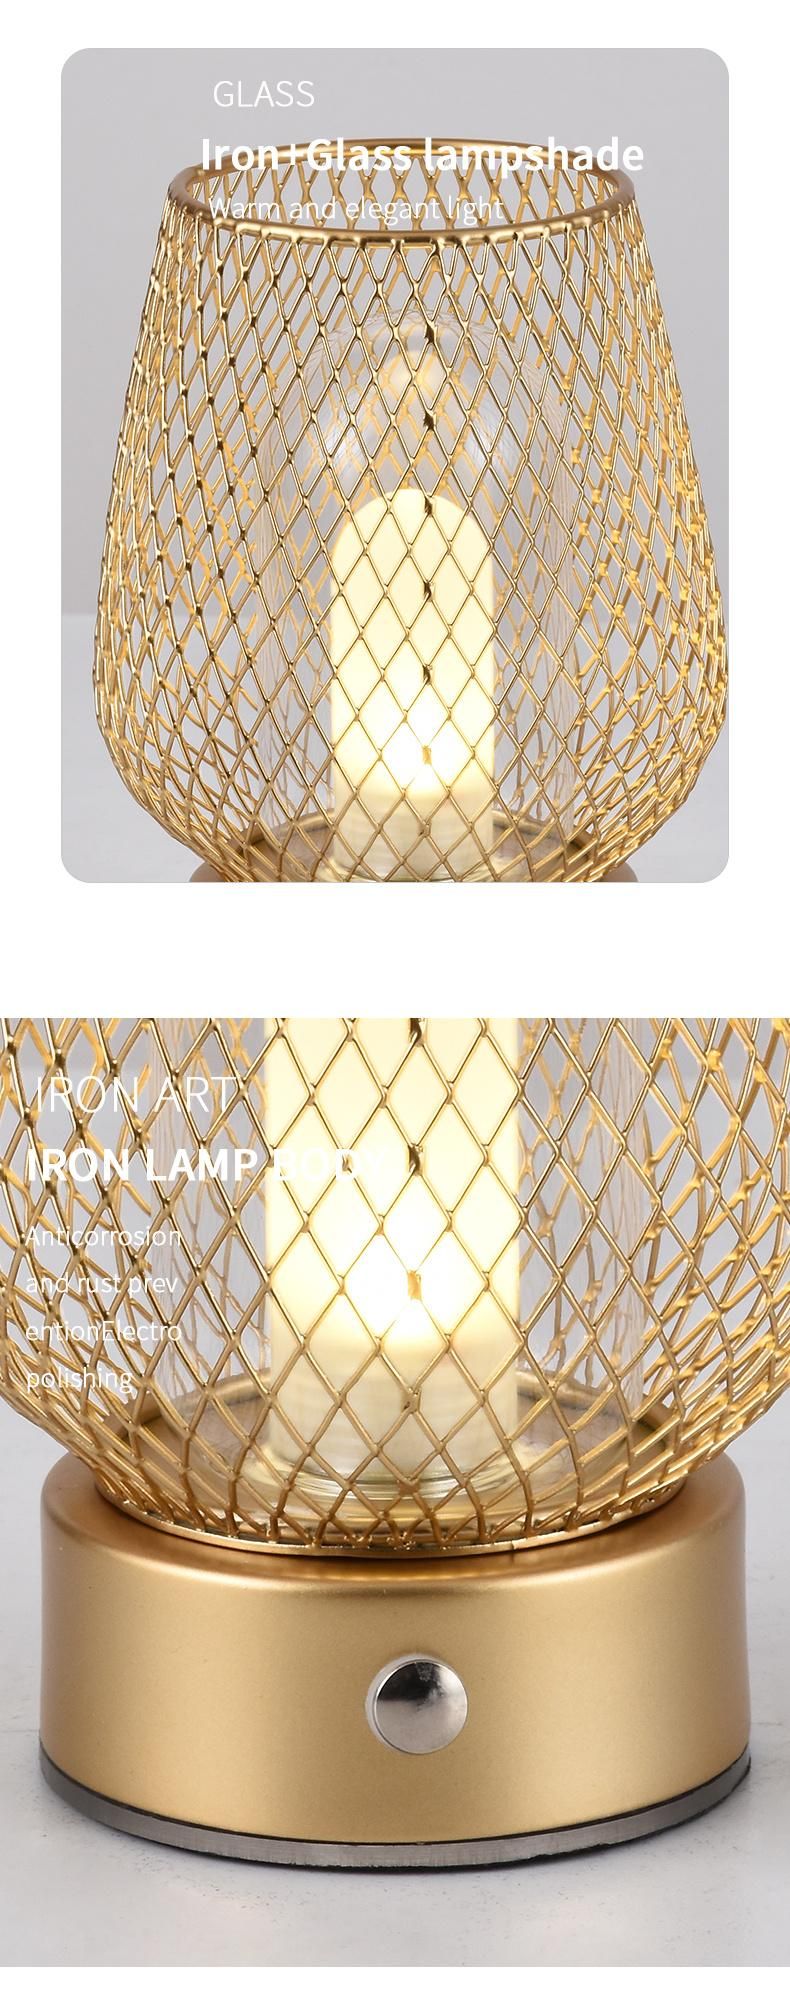 Wood Rattan Twine Ball Lights Table Lamp Room Home Art Decor Desk Light Lamp Touch Switch Long Press Dimming